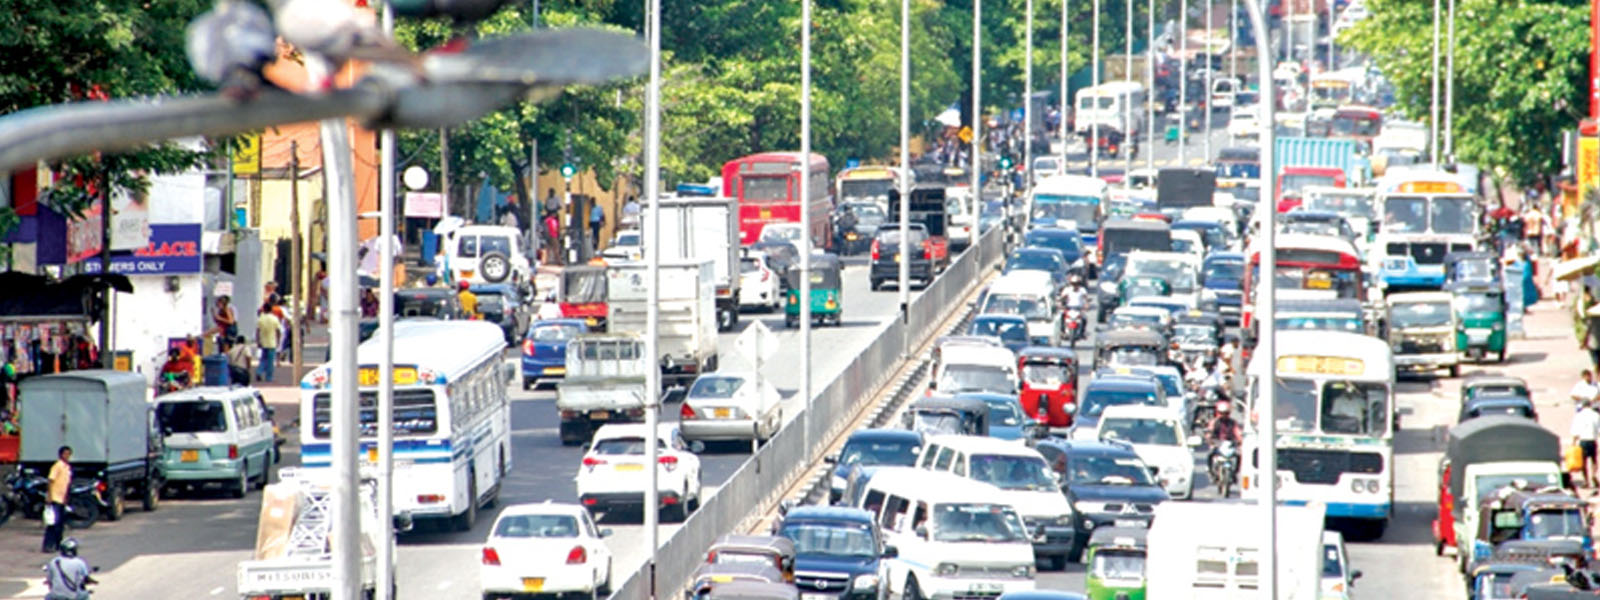 Heavy traffic around Colombo due to protests